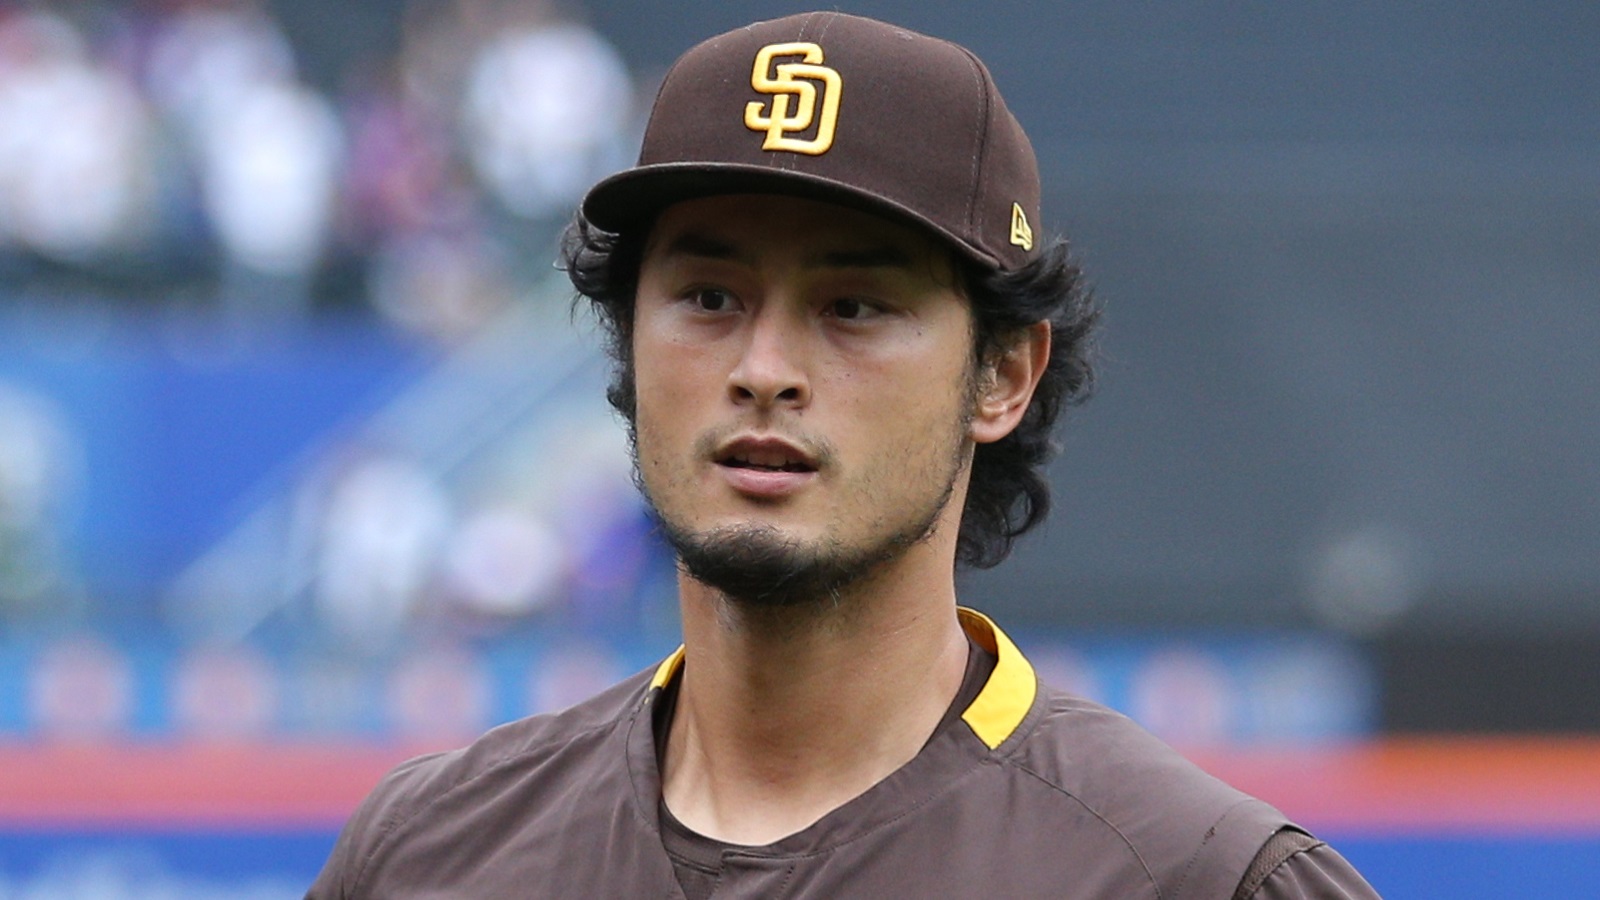 Yu Darvish sets MLB record no other Japanese player has done